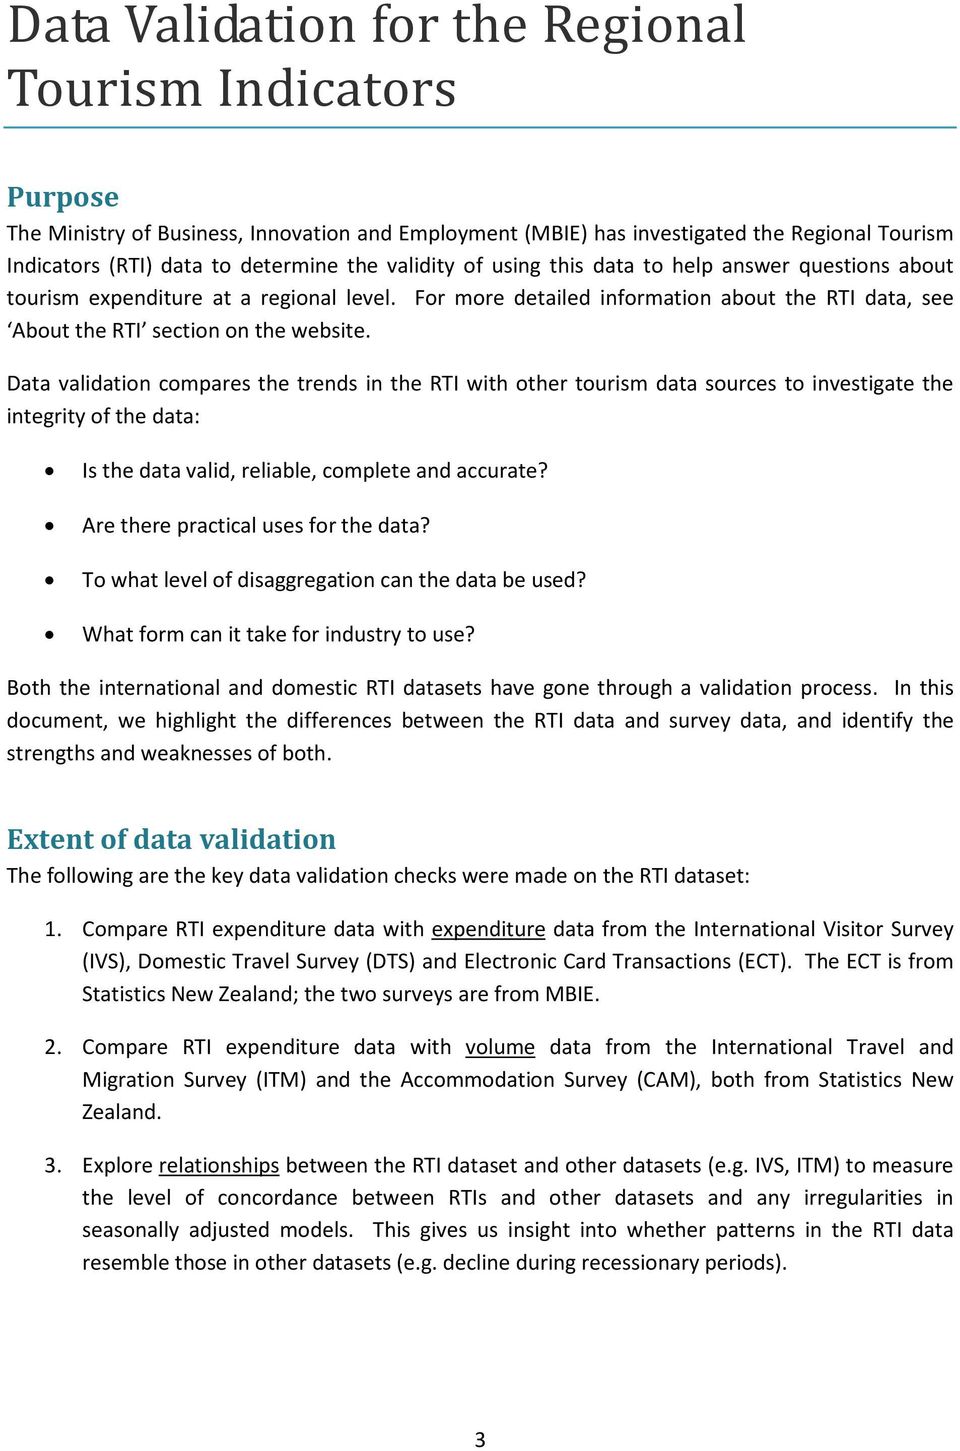 Data validation compares the trends in the RTI with other tourism data sources to investigate the integrity of the data: Is the data valid, reliable, complete and accurate?